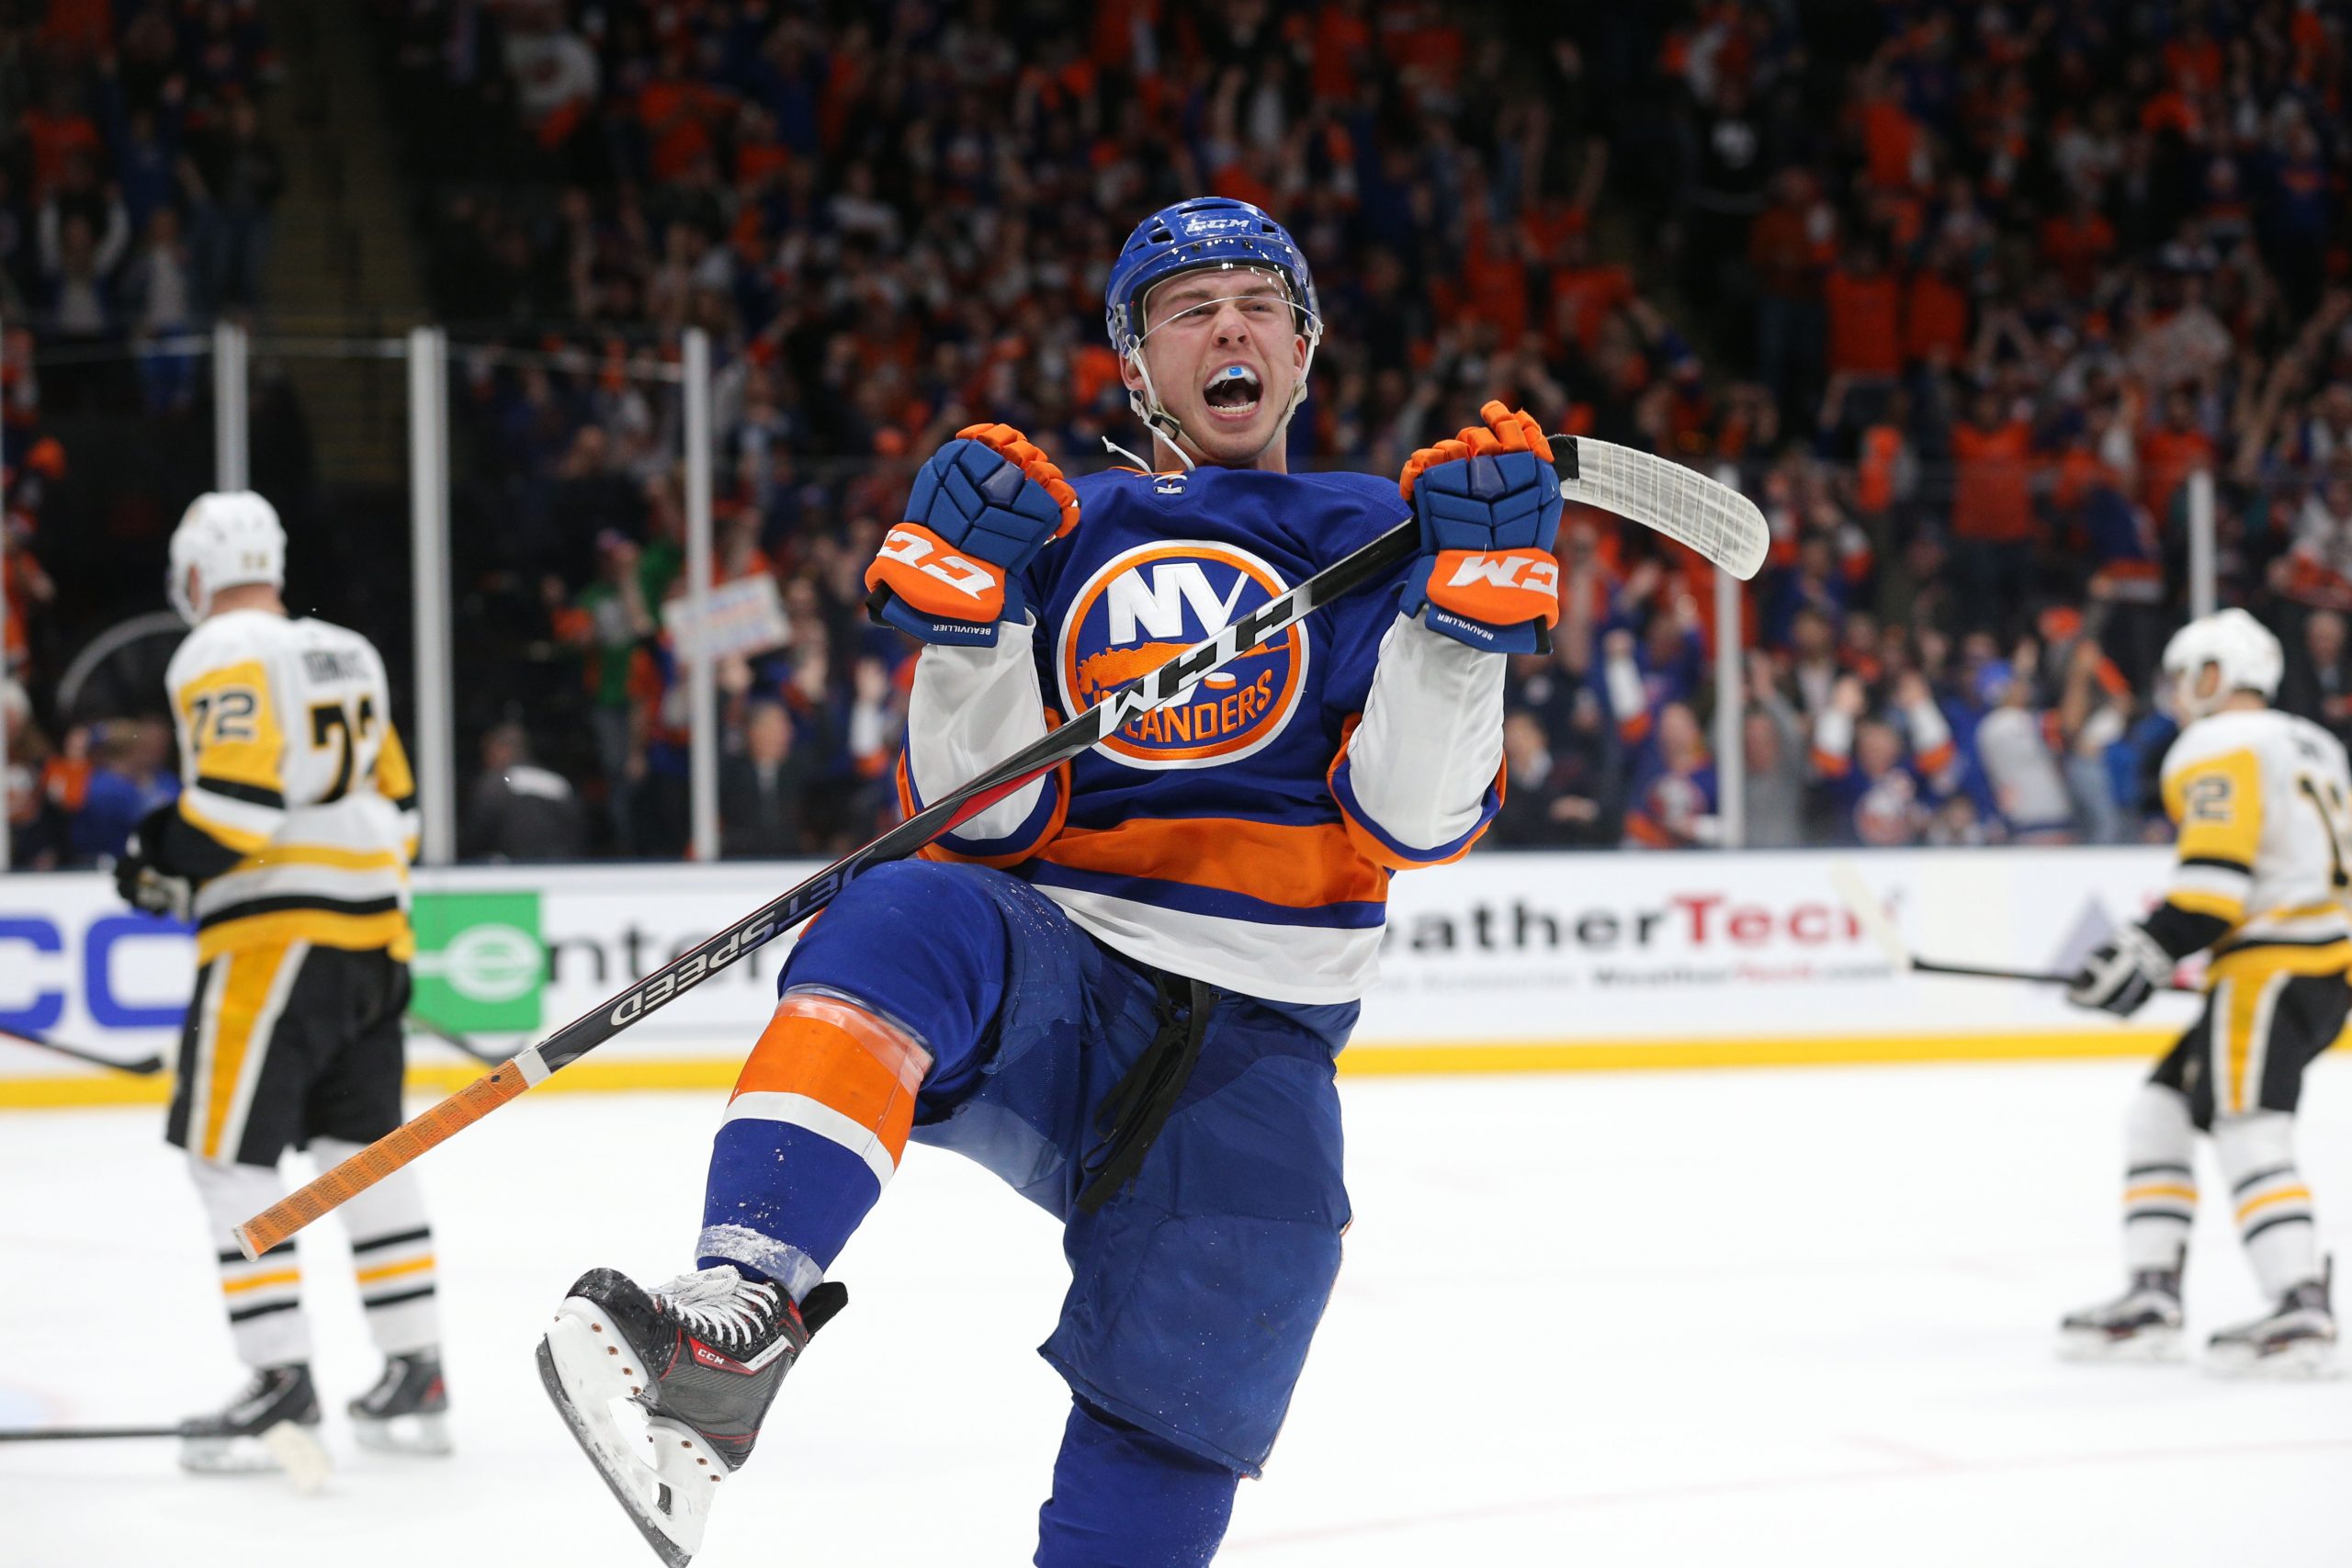 Apr 12, 2019; Uniondale, NY, USA; New York Islanders left wing Anthony Beauvillier (18) celebrates his goal against the Pittsburgh Penguins during the second period of game two of the first round of the 2019 Stanley Cup Playoffs at Nassau Veterans Memorial Coliseum. Mandatory Credit: Brad Penner-USA TODAY Sports